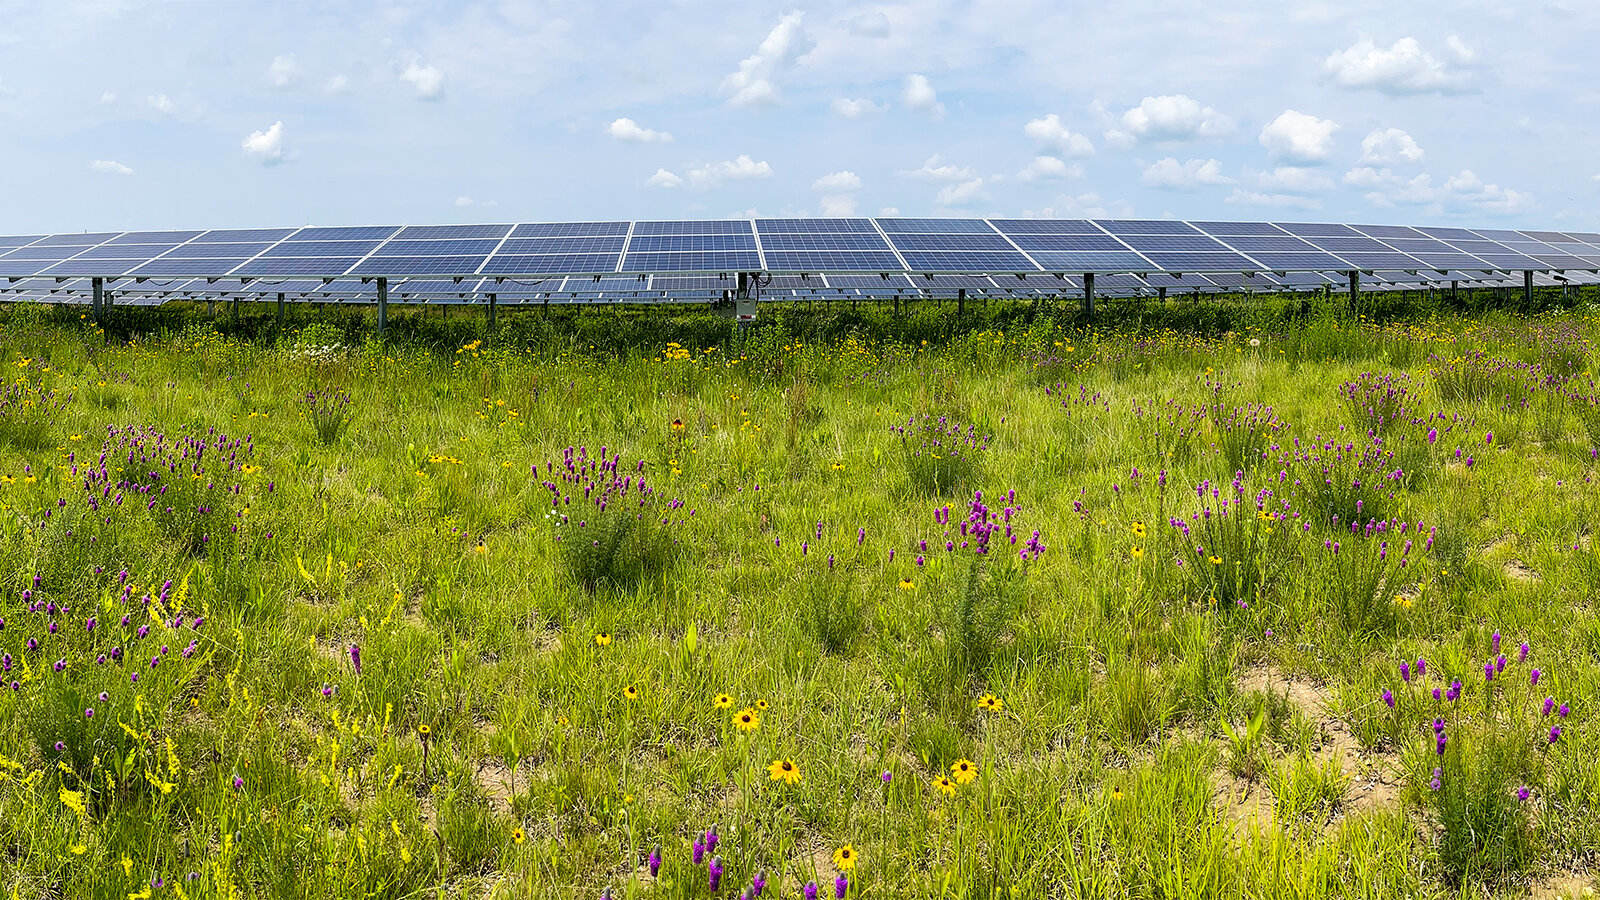 Insect populations flourish in the restored habitats of solar energy facilities